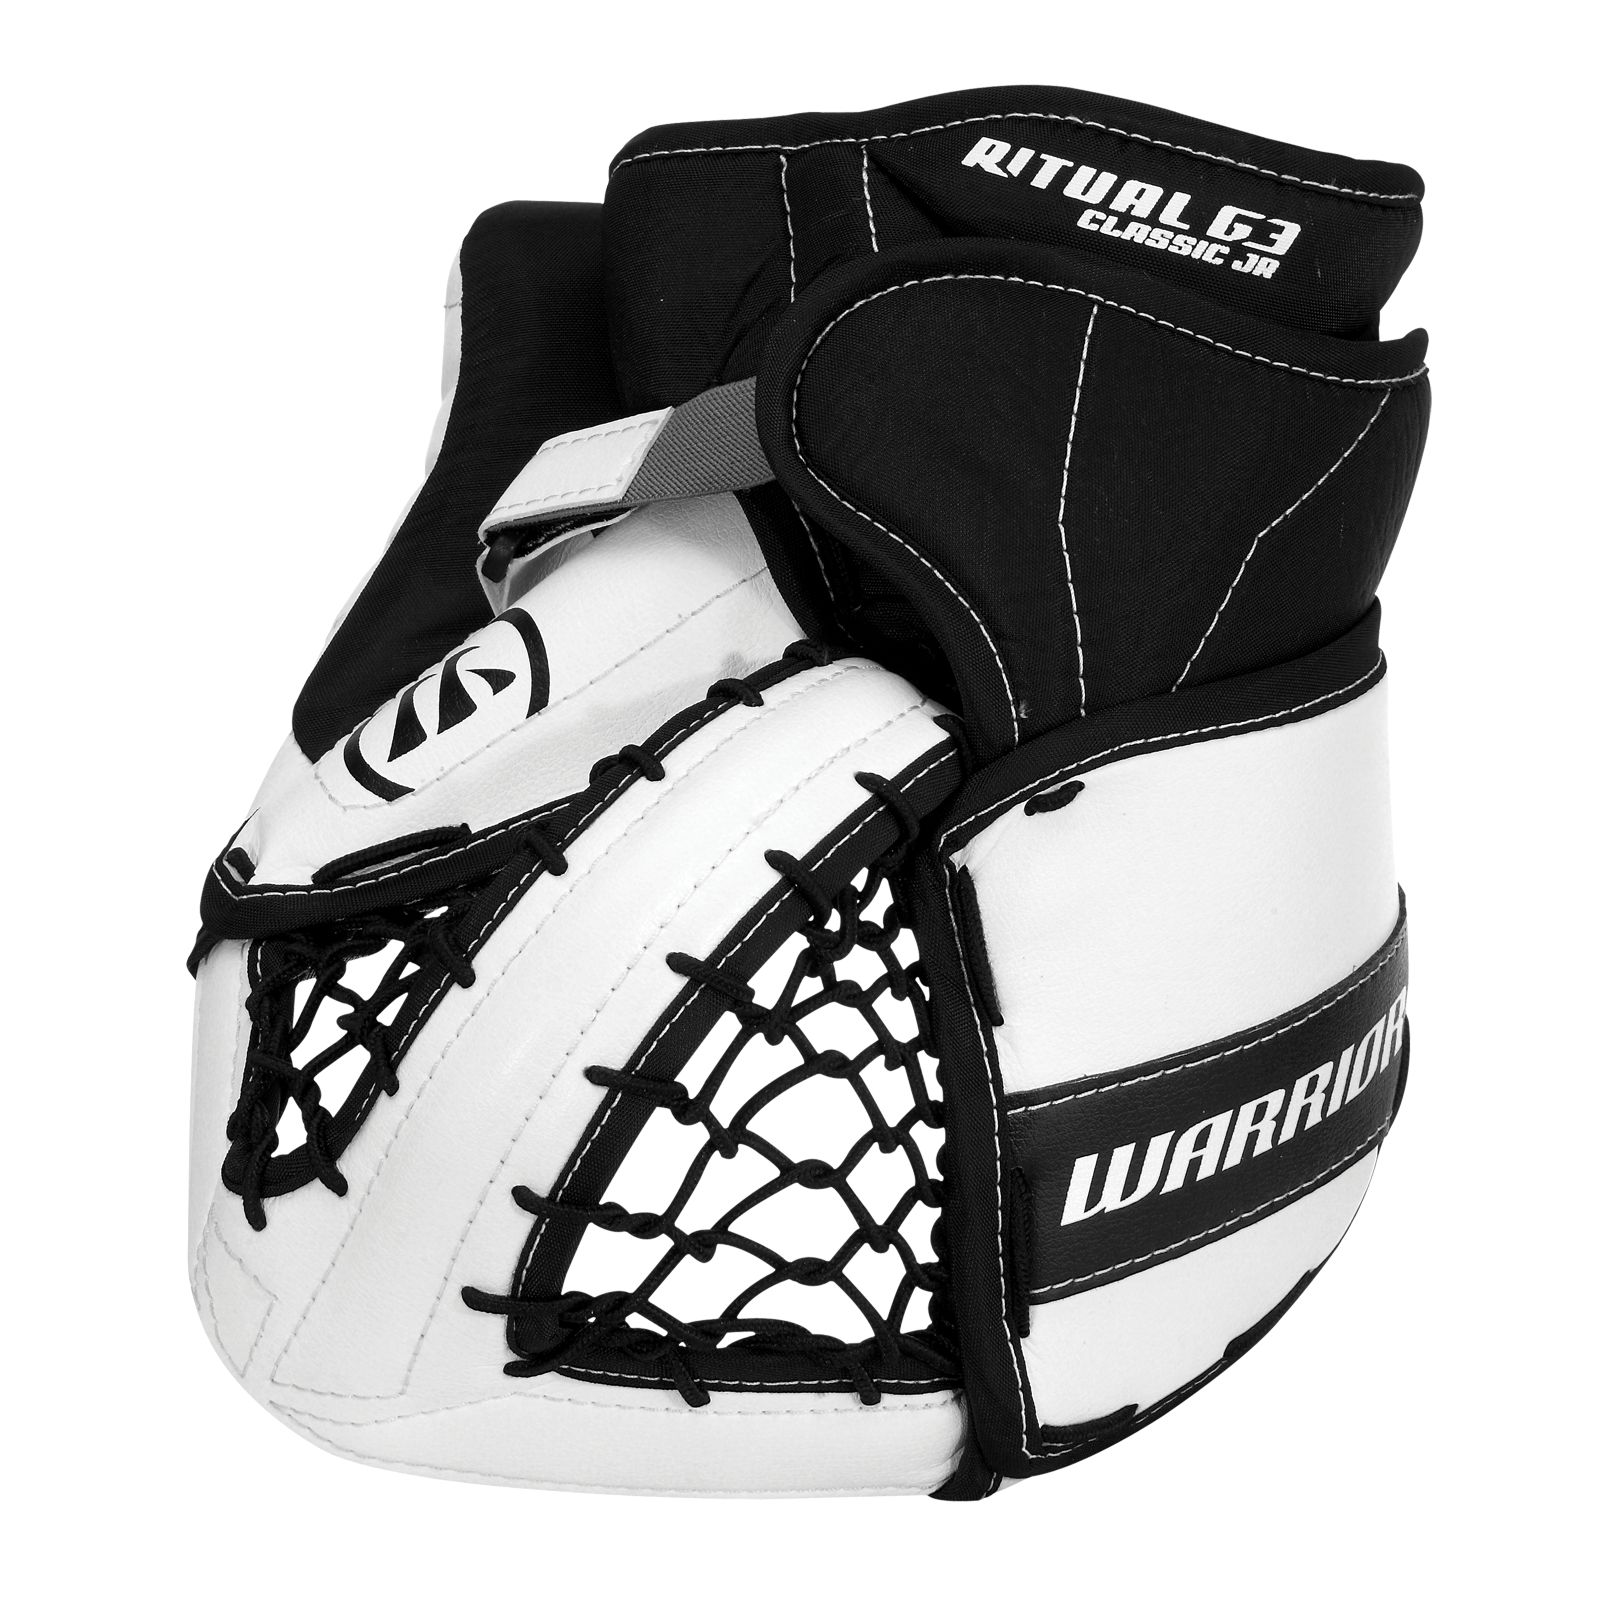 Ritual G3 Jr. Trapper, White with Black image number 1